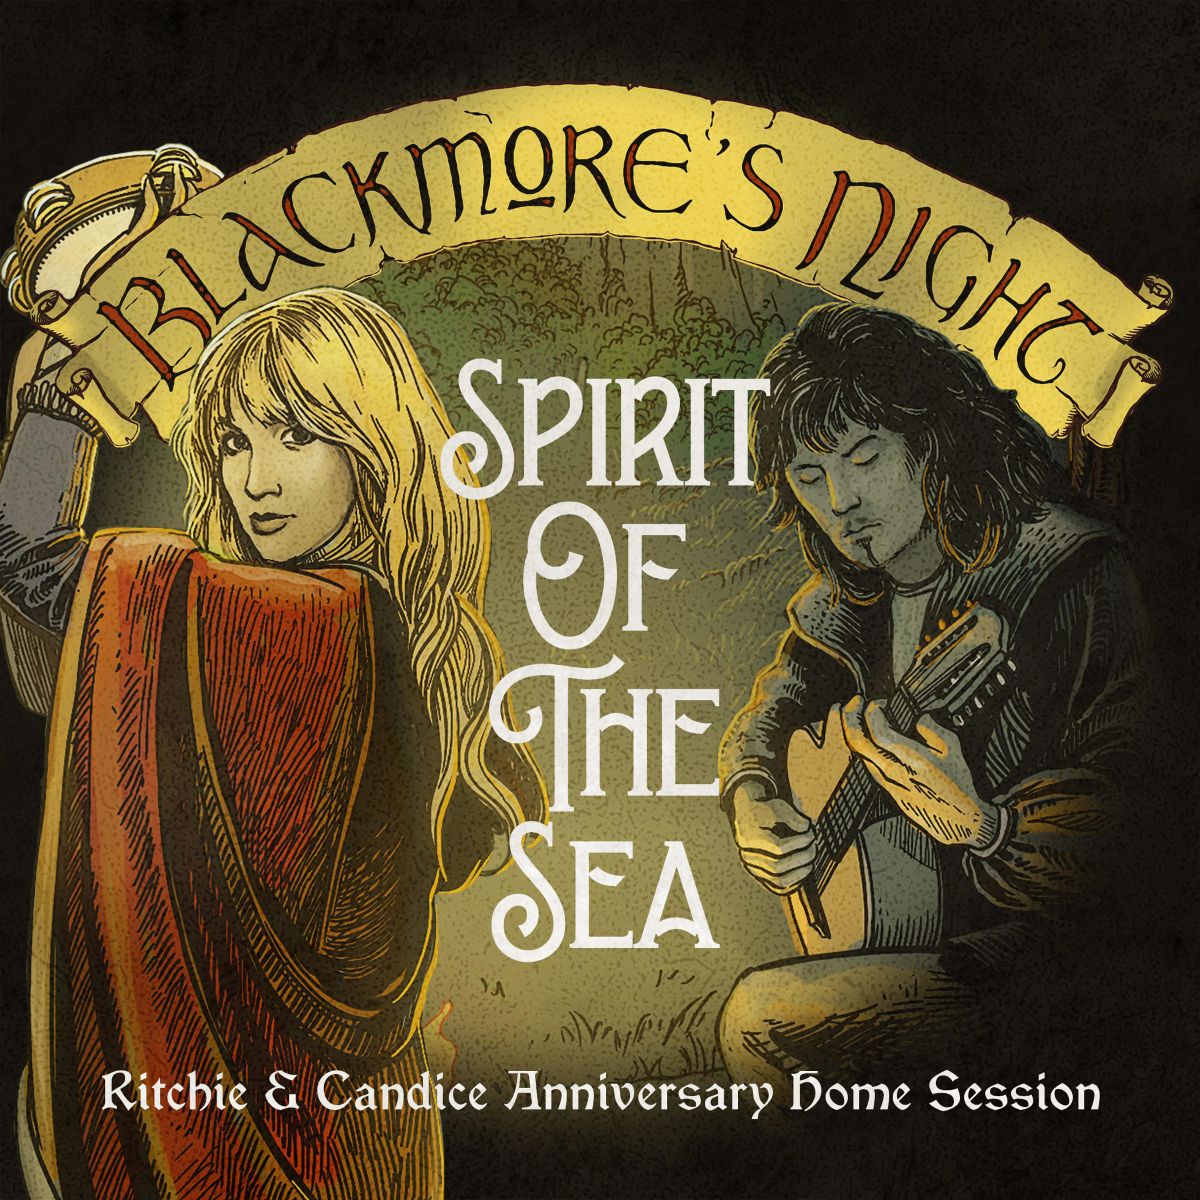 Blackmore’s Night Share “Spirit of The Sea (Ritchie + Candice Anniversary Home Session)”